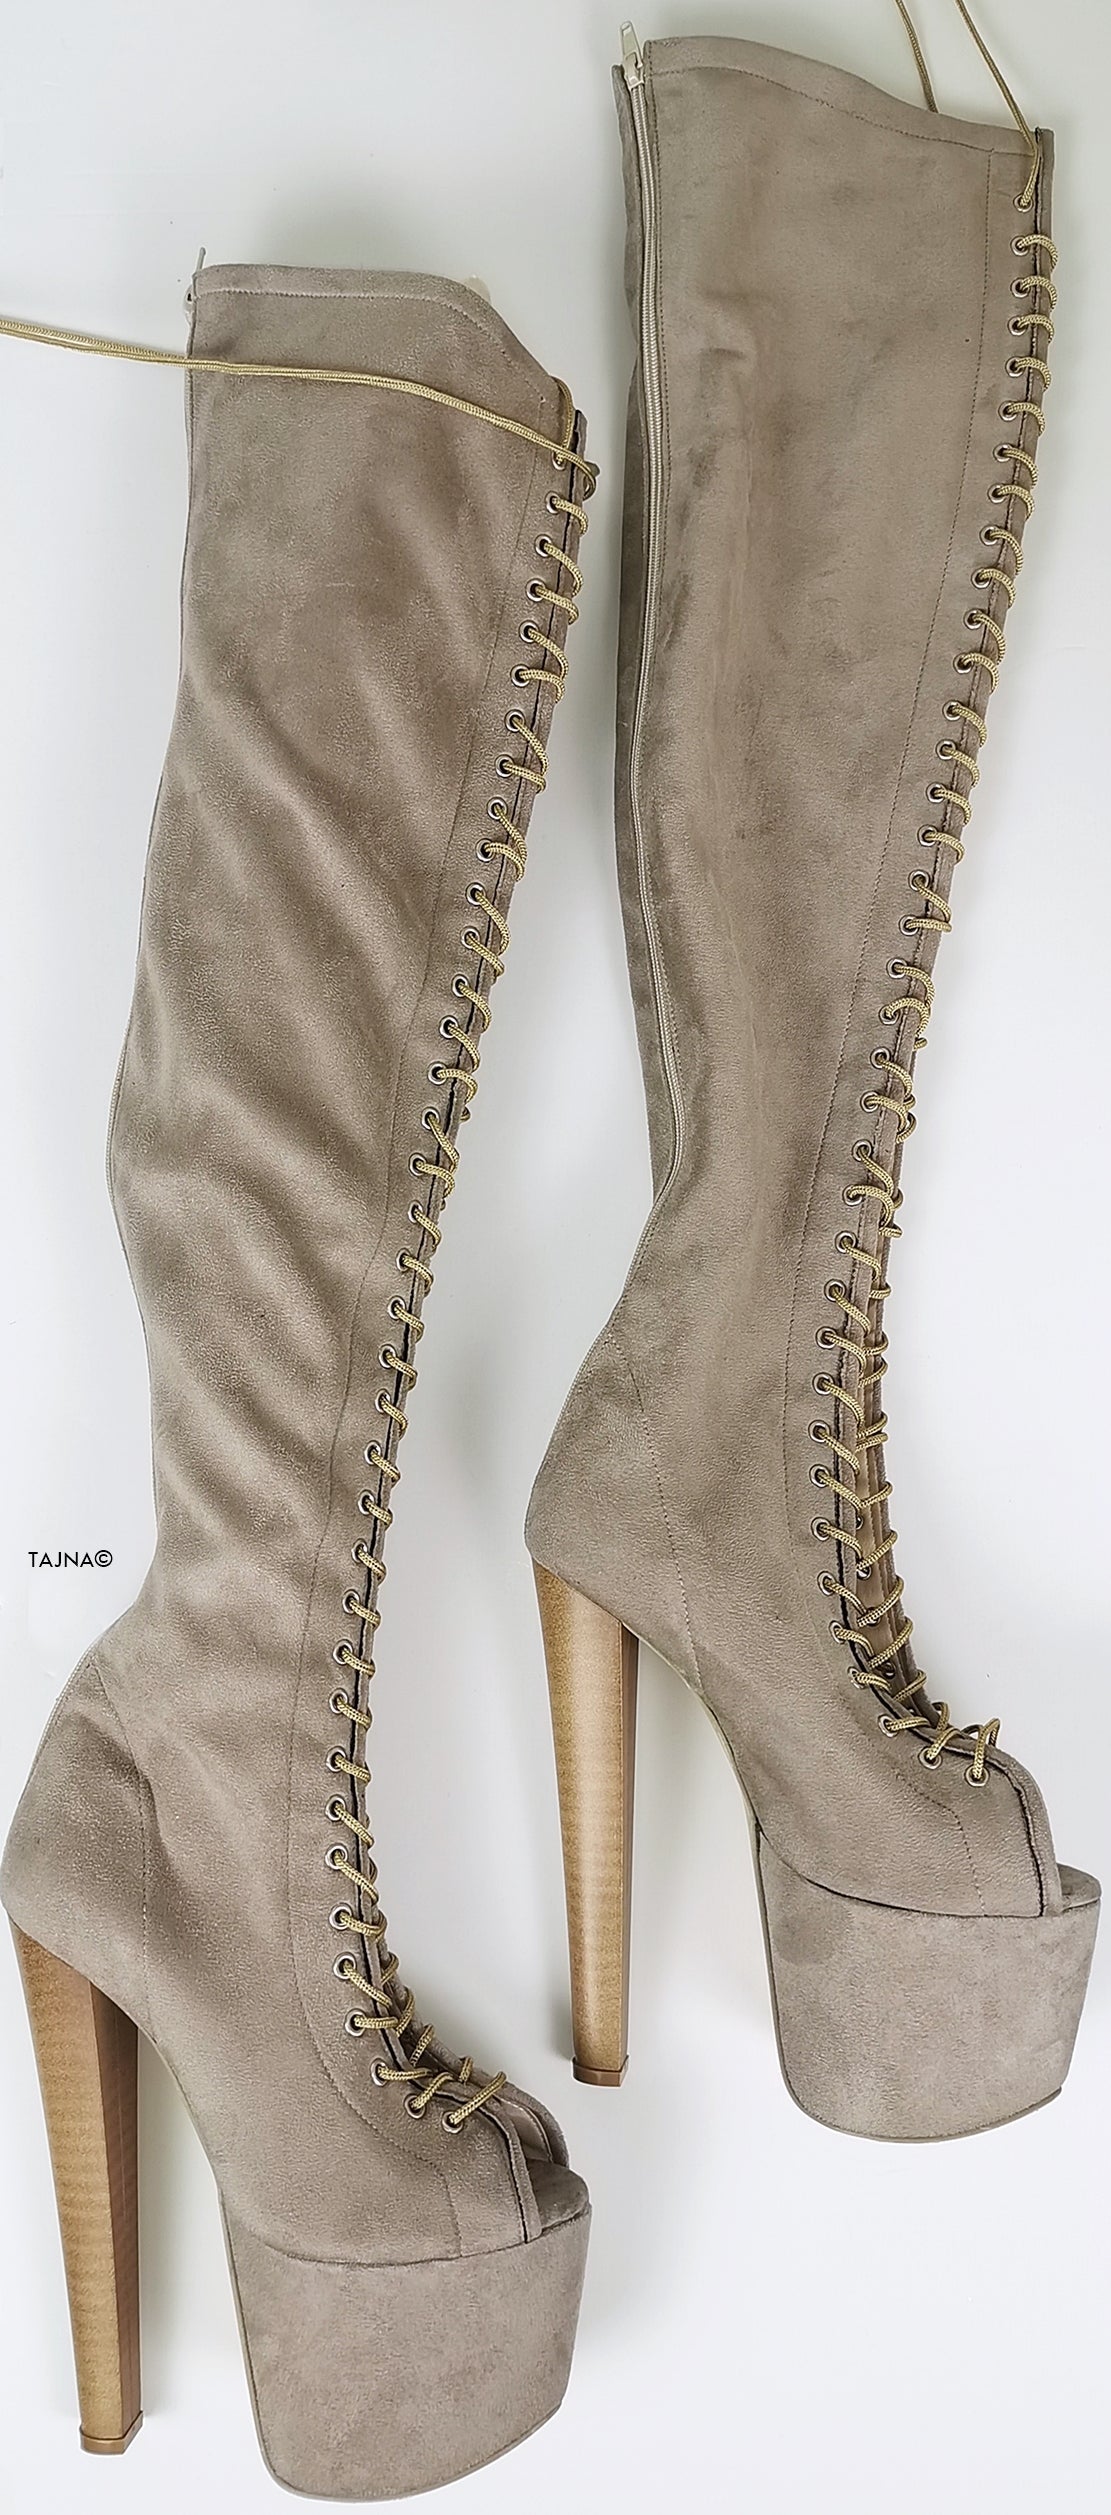 Beige Suede Gladiator Lace Up Thigh High Boots - Tajna Club